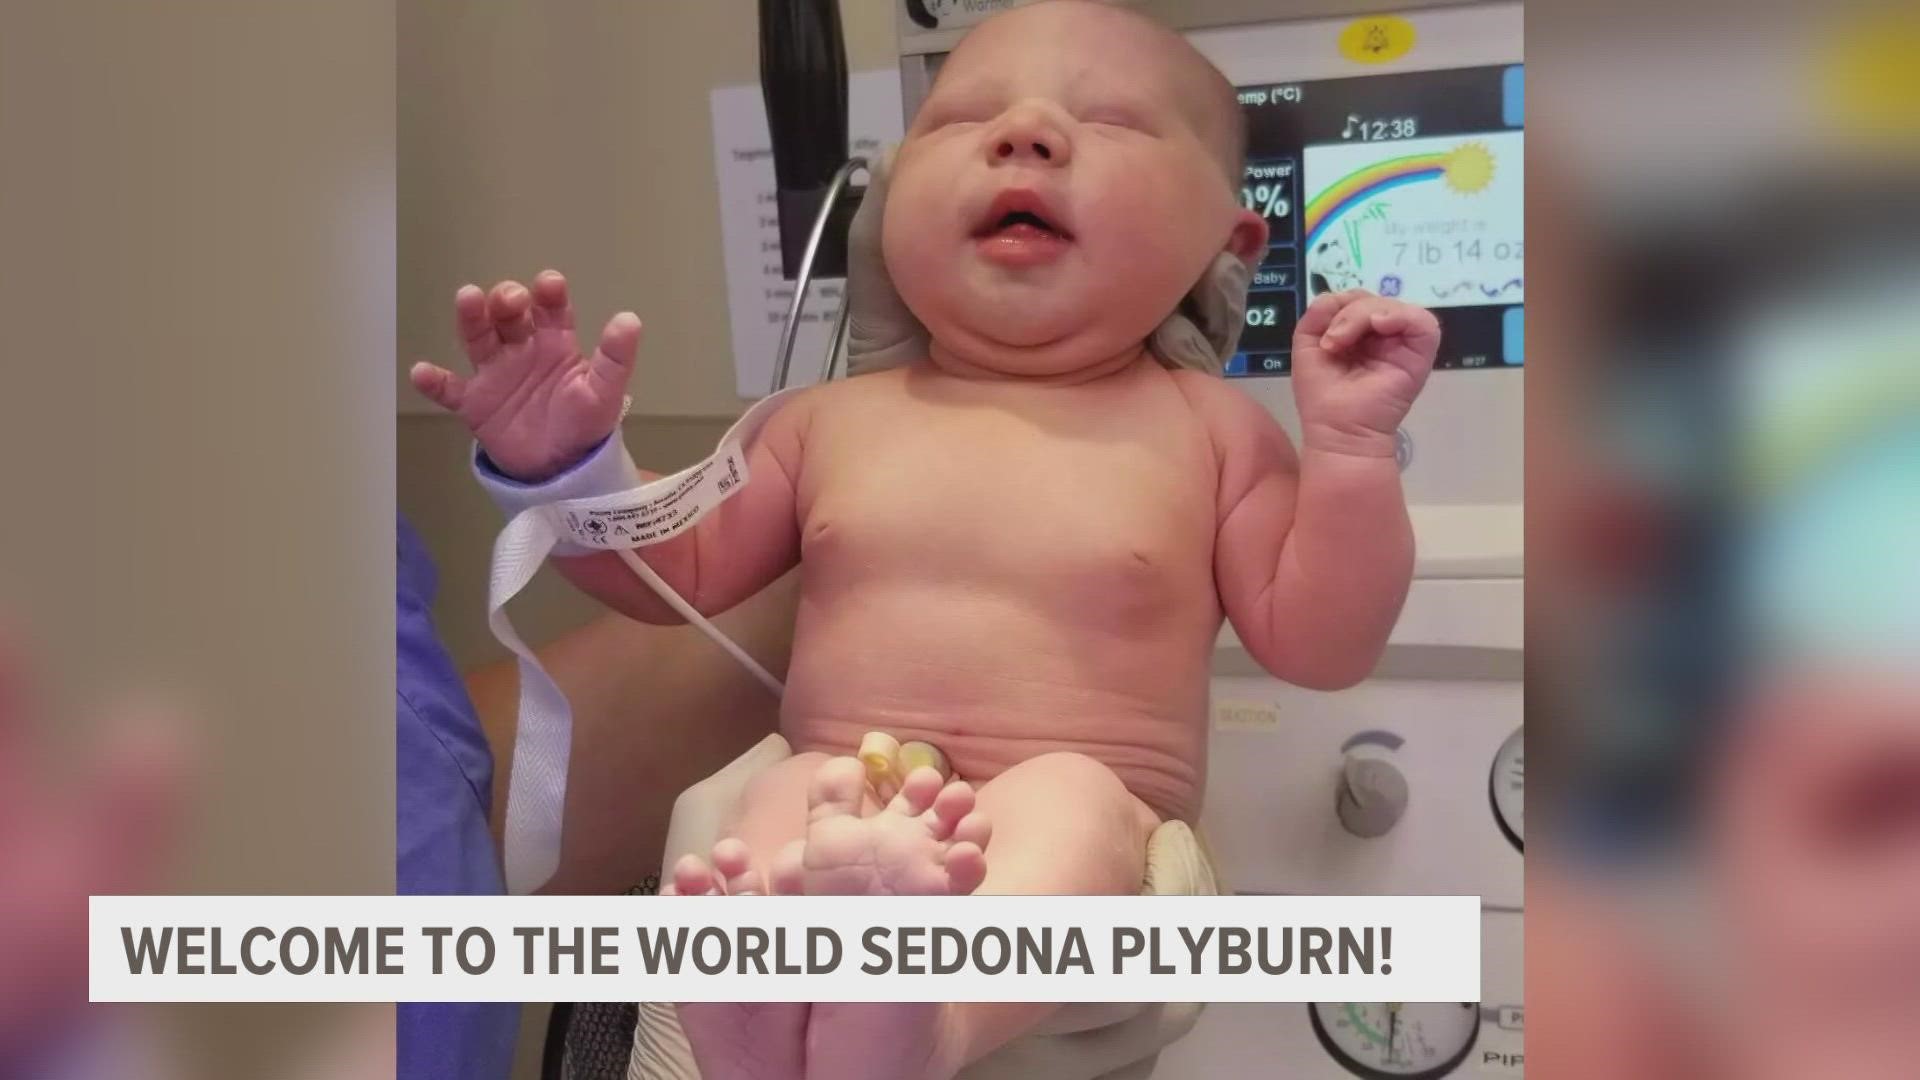 13 ON YOUR SIDE's Jay Plyburn and his wife, Whitney, welcomed their first child, Sedona Mae, on Sept. 21. Congratulations to the Plyburn family!